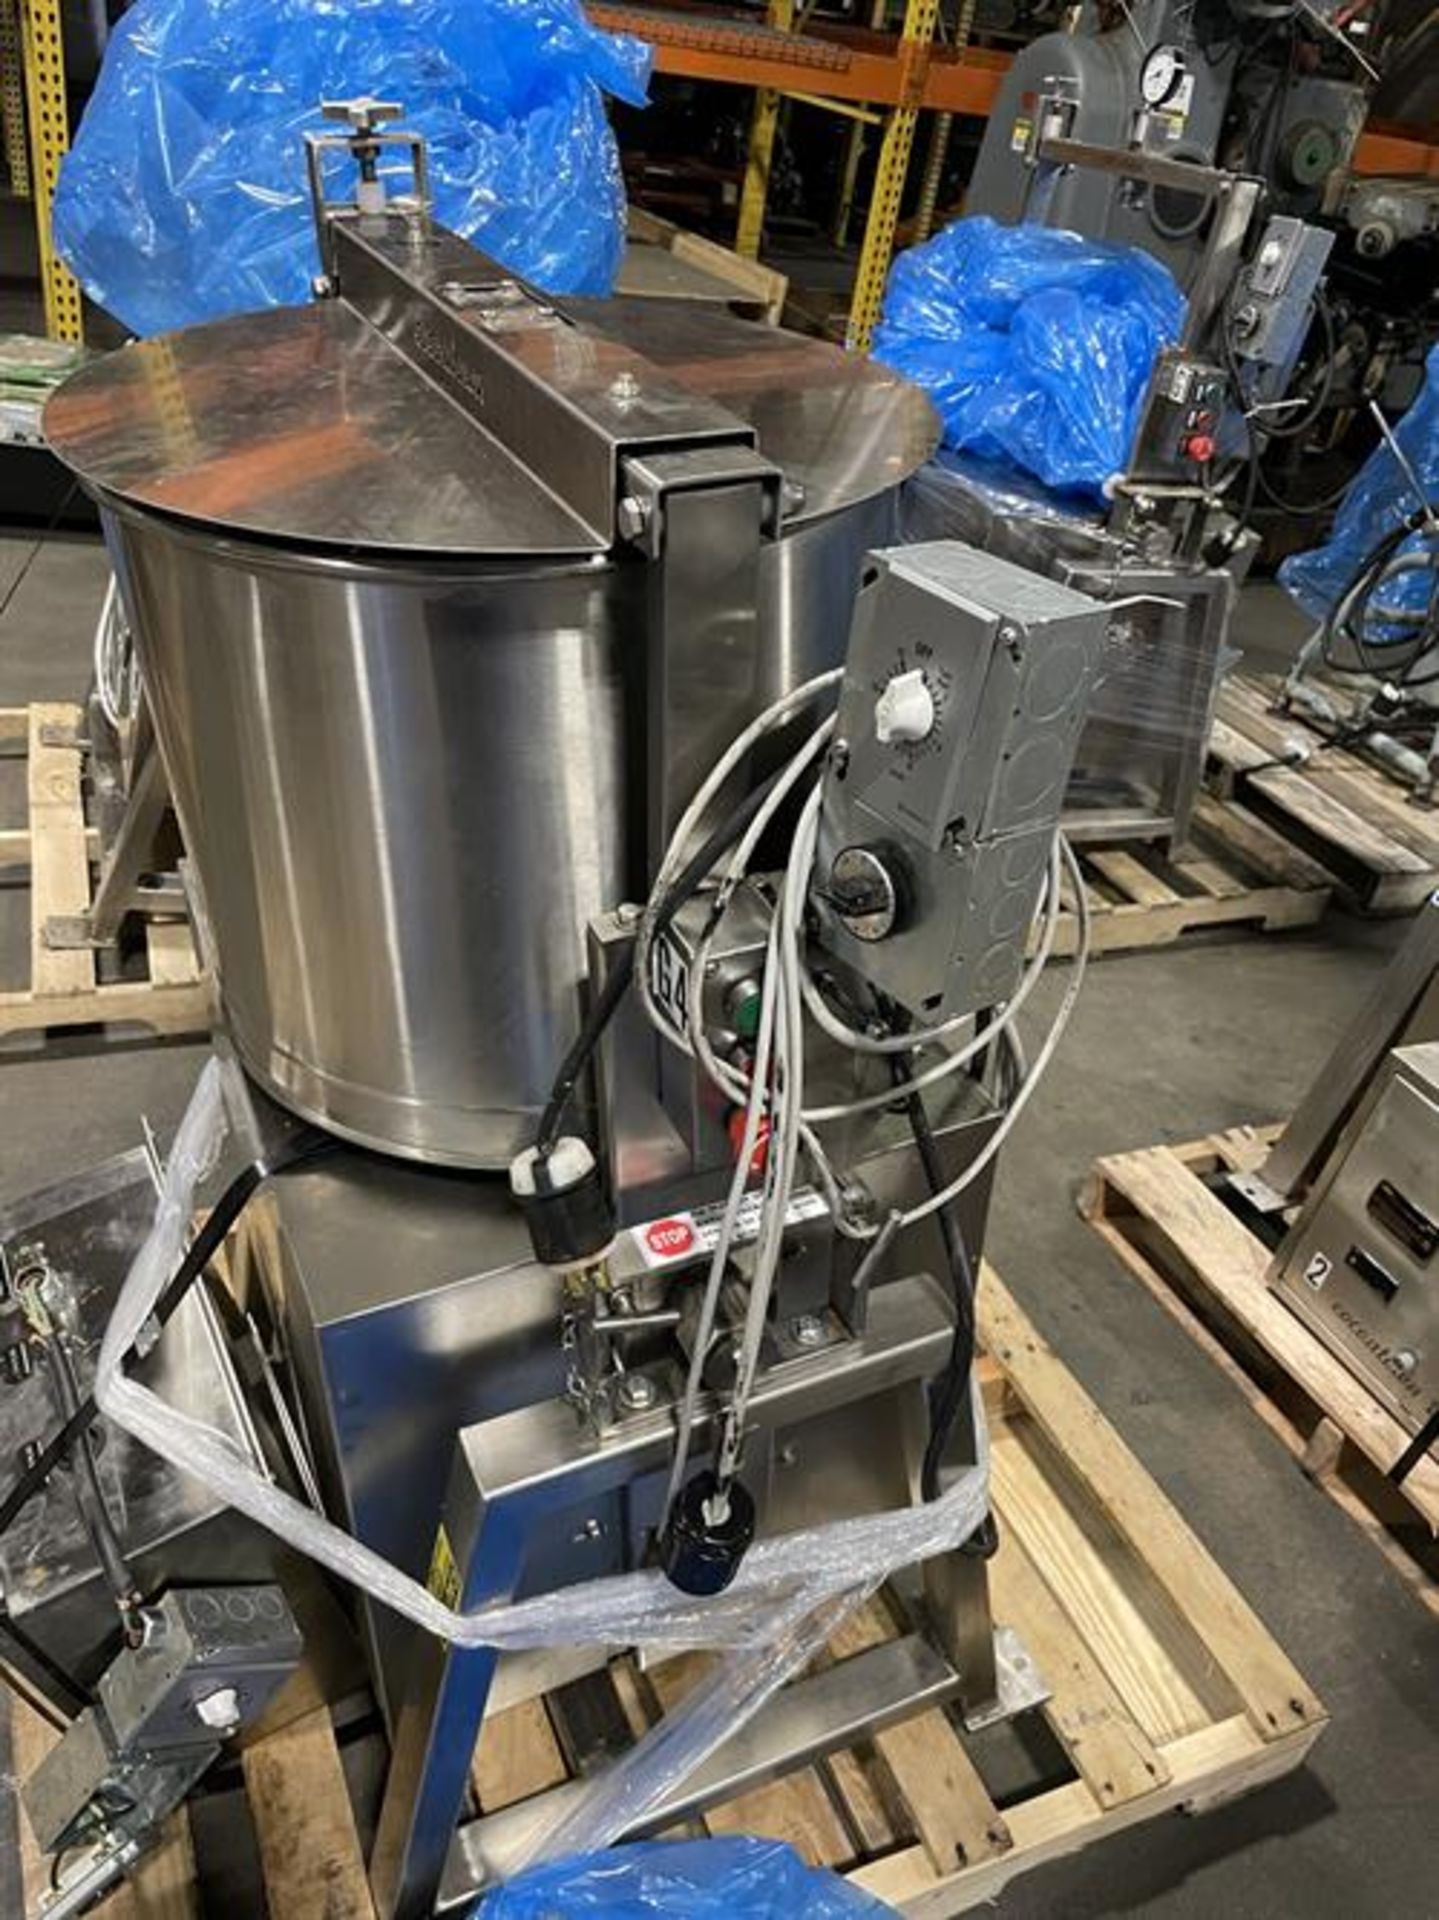 Cocoatown Model ECGC-65-A-BV Melangeur - Serial number 200-312 - 65 lb batch capacity for nibs - - Image 4 of 7